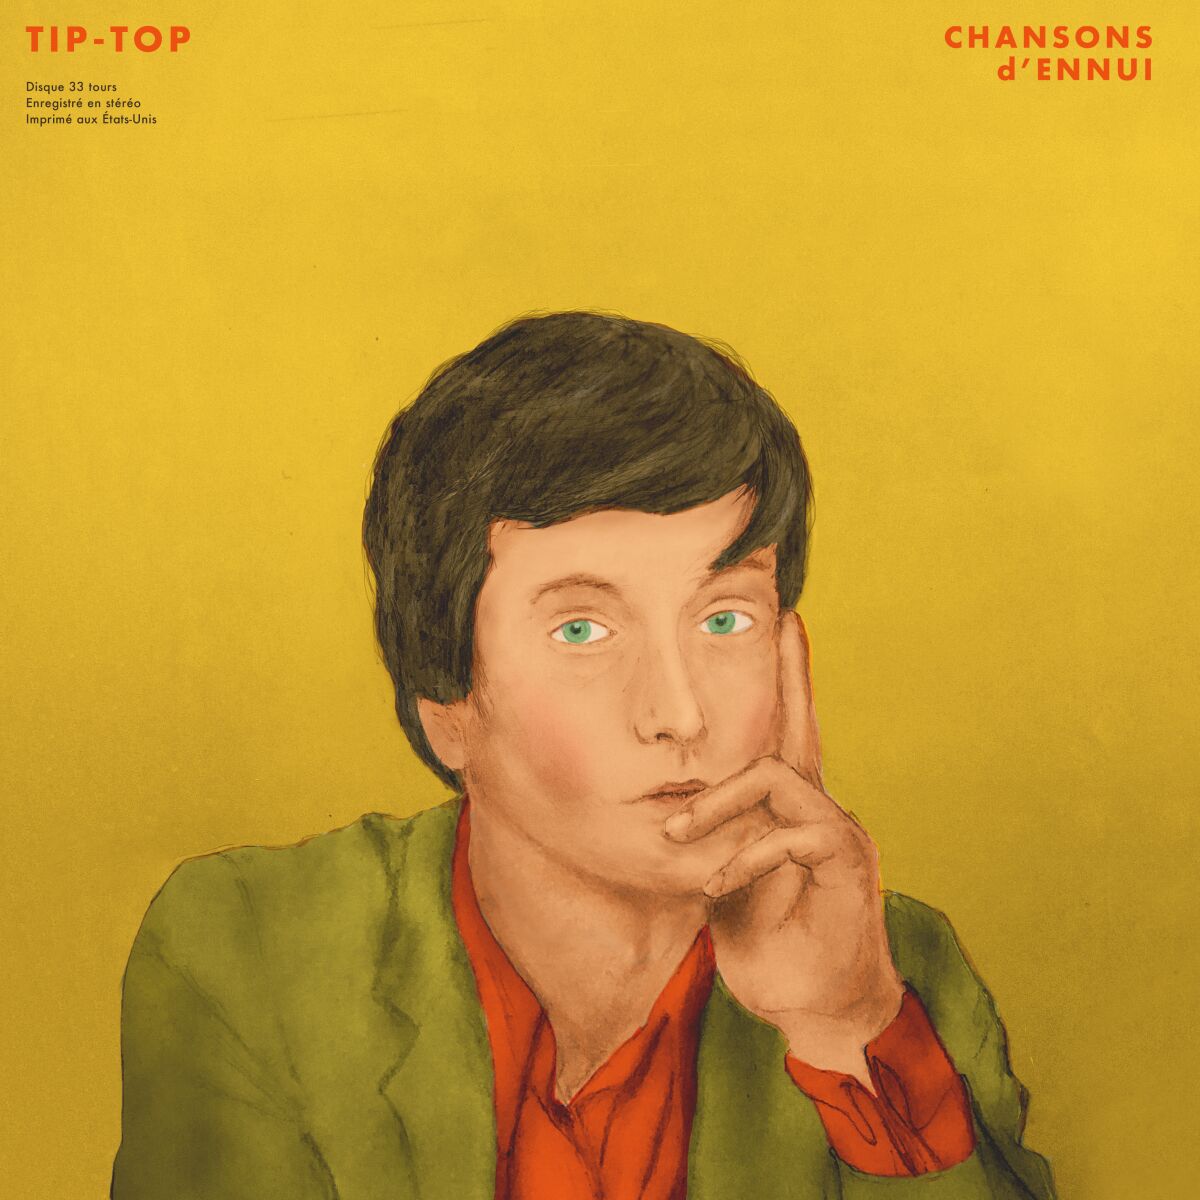 An album cover illustration of a man on a yellow background